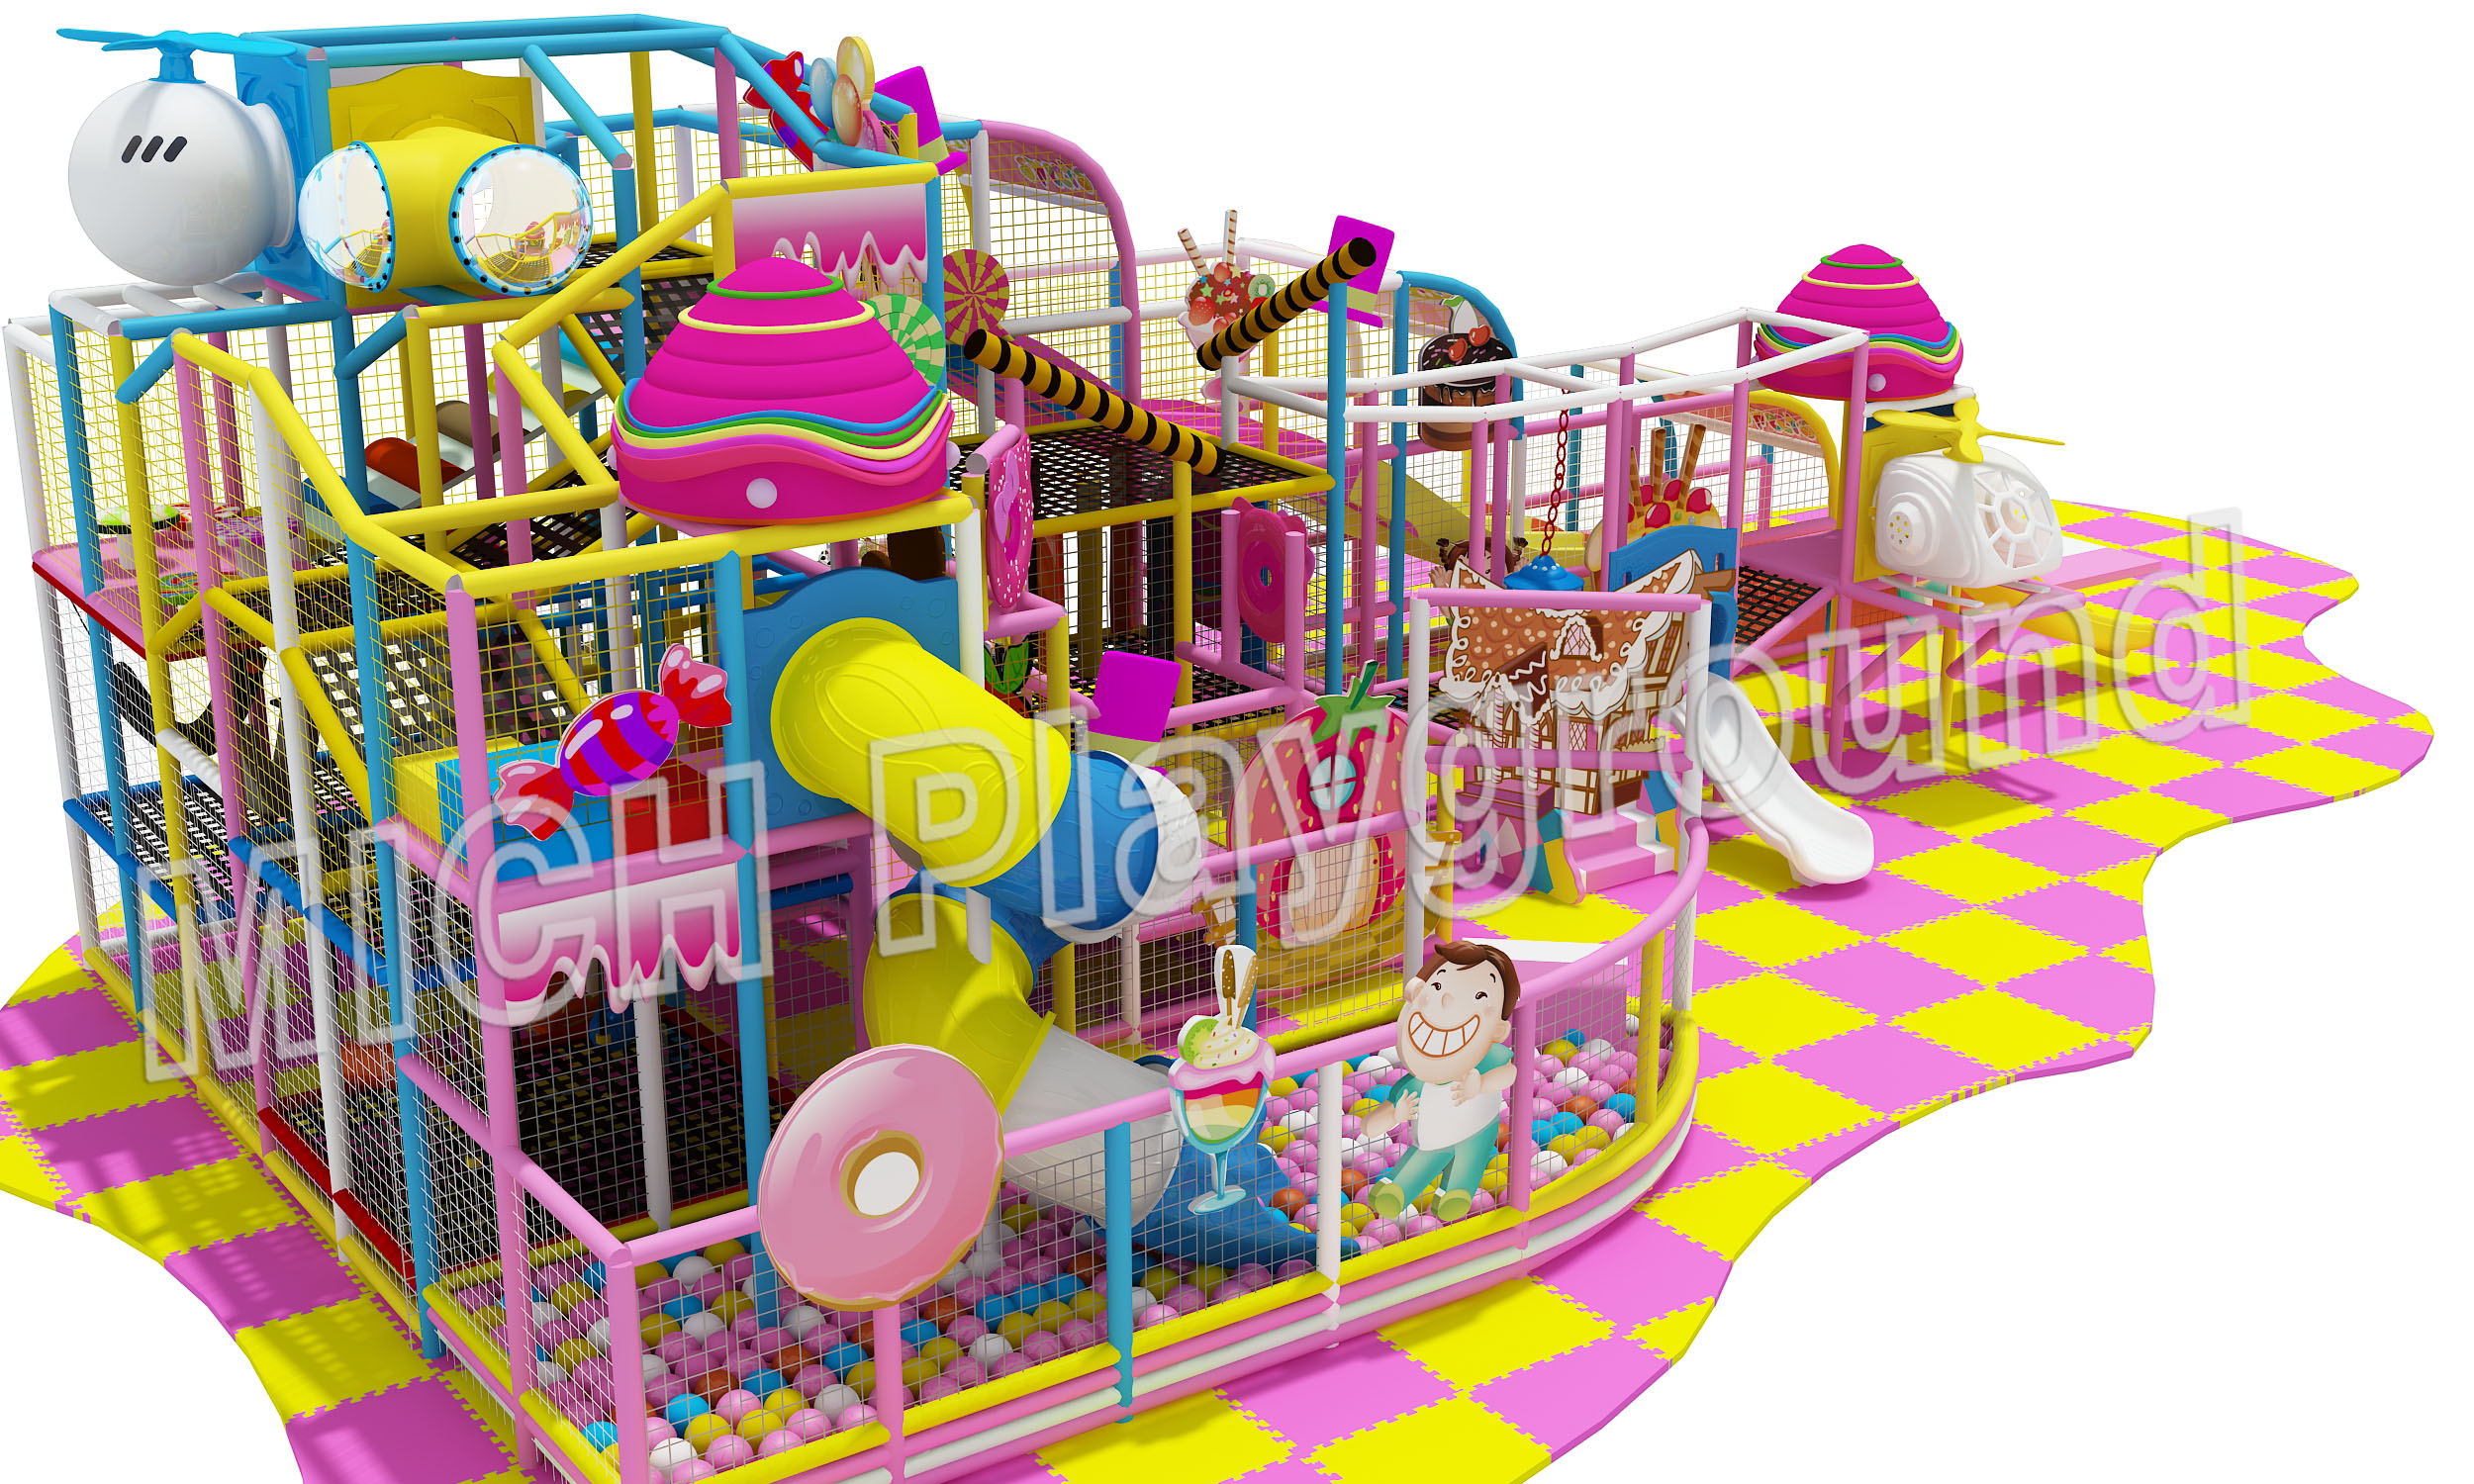 Mich Funny Indoor Amusement Playground 6645A